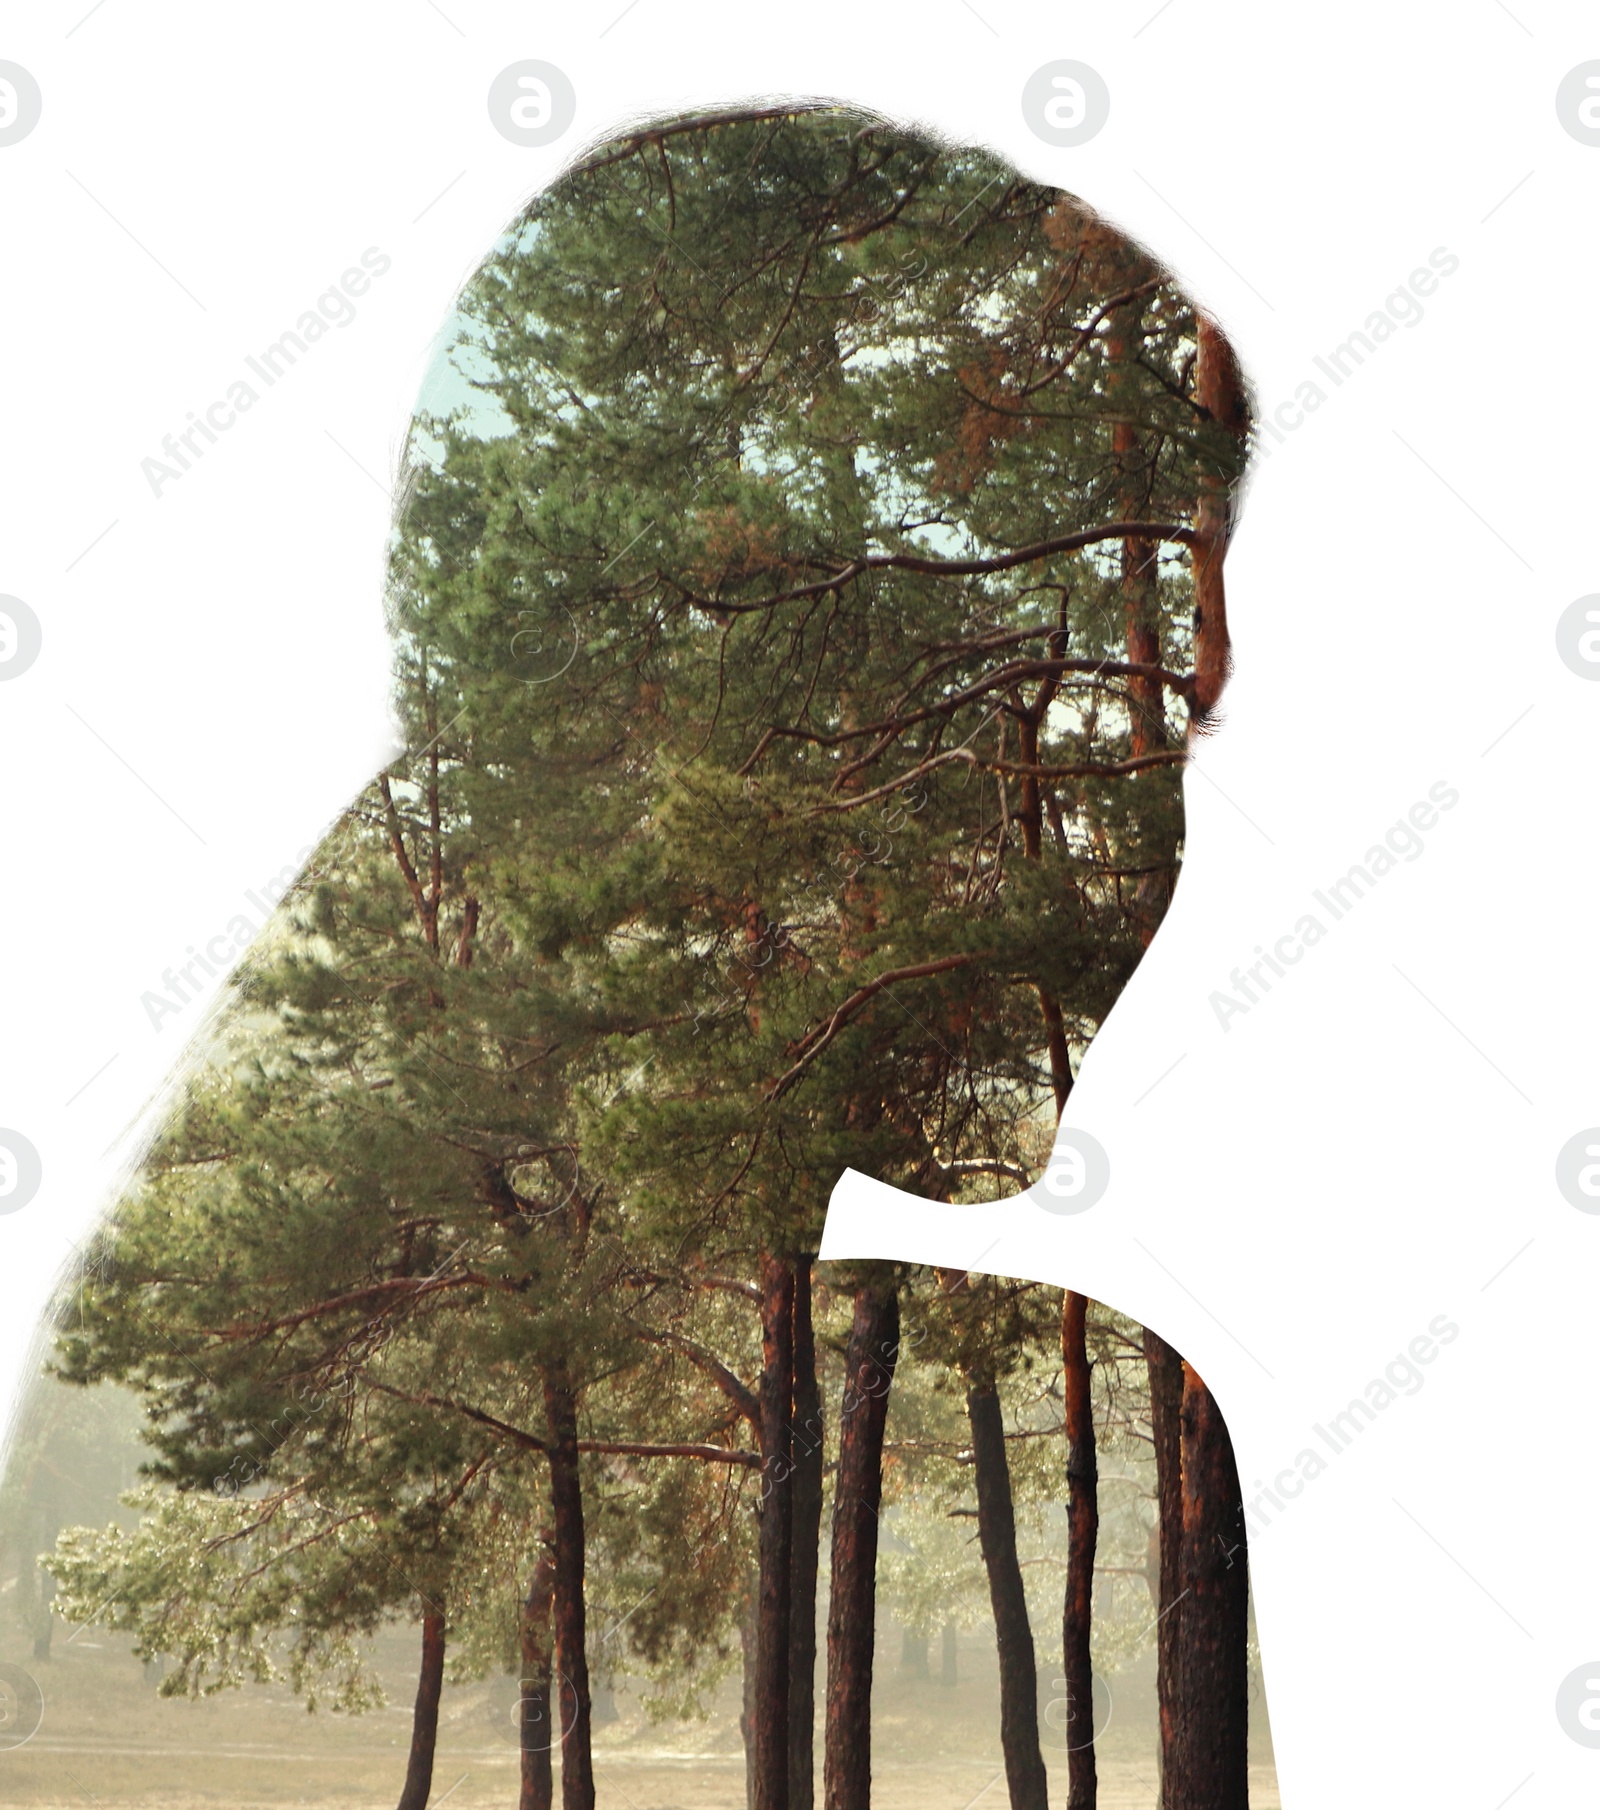 Image of Double exposure with silhouette of woman and trees on white background